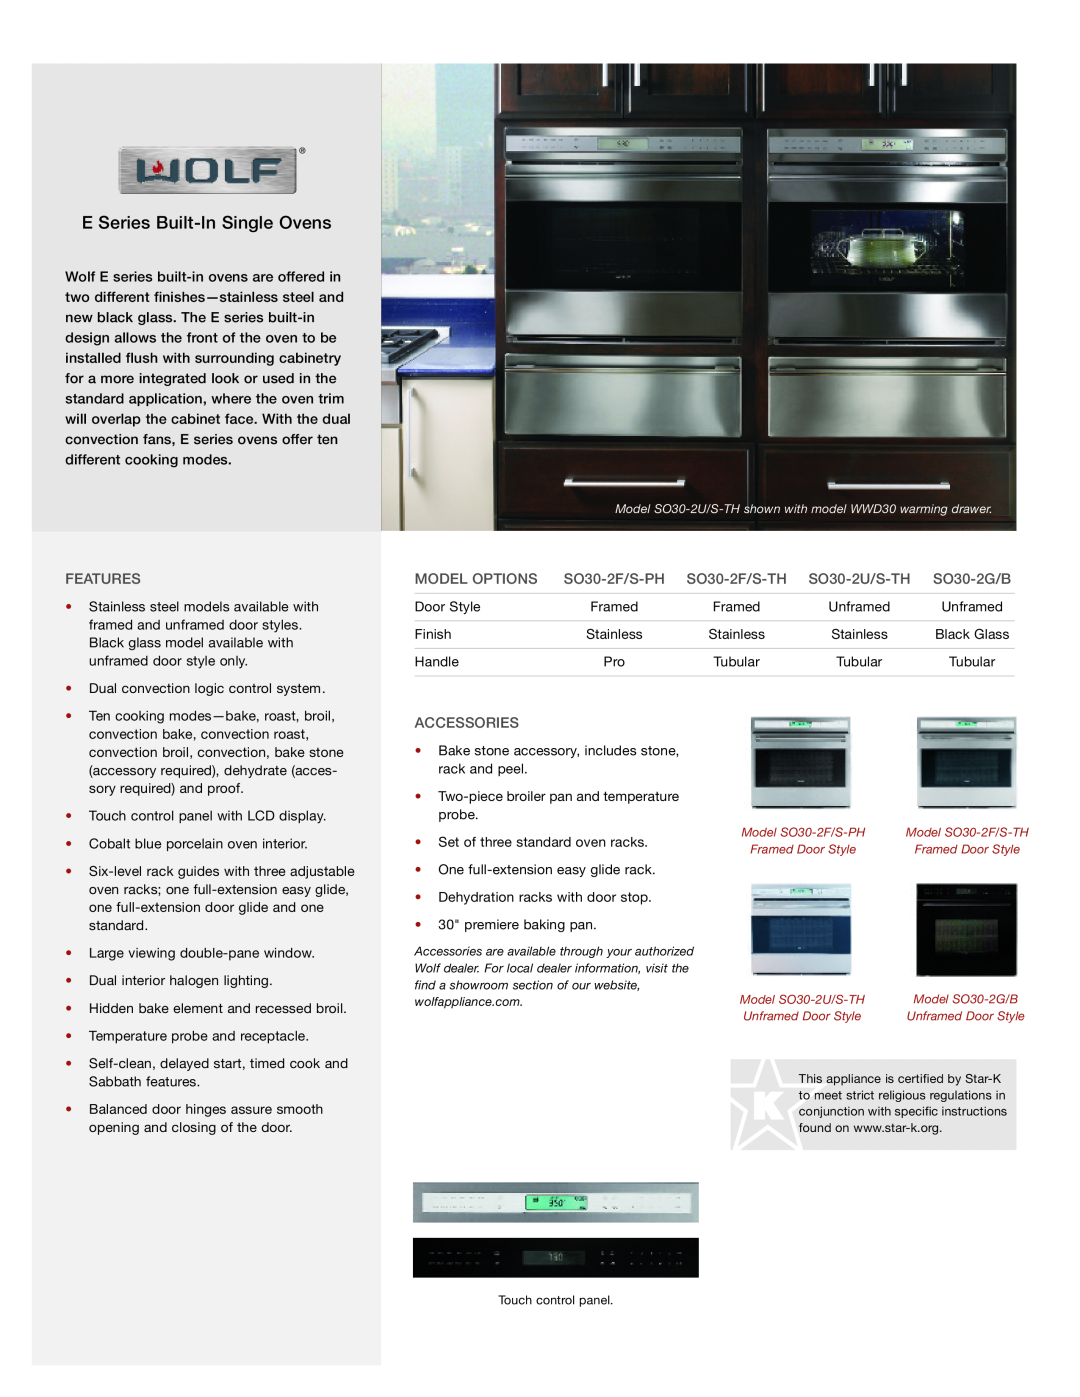 Wolf SO30-2F/S-PH, SO30-2F/S-TH, SO30-2U/S-TH manual E Series Built-In Single Ovens, Features, Model Options, Accessories 